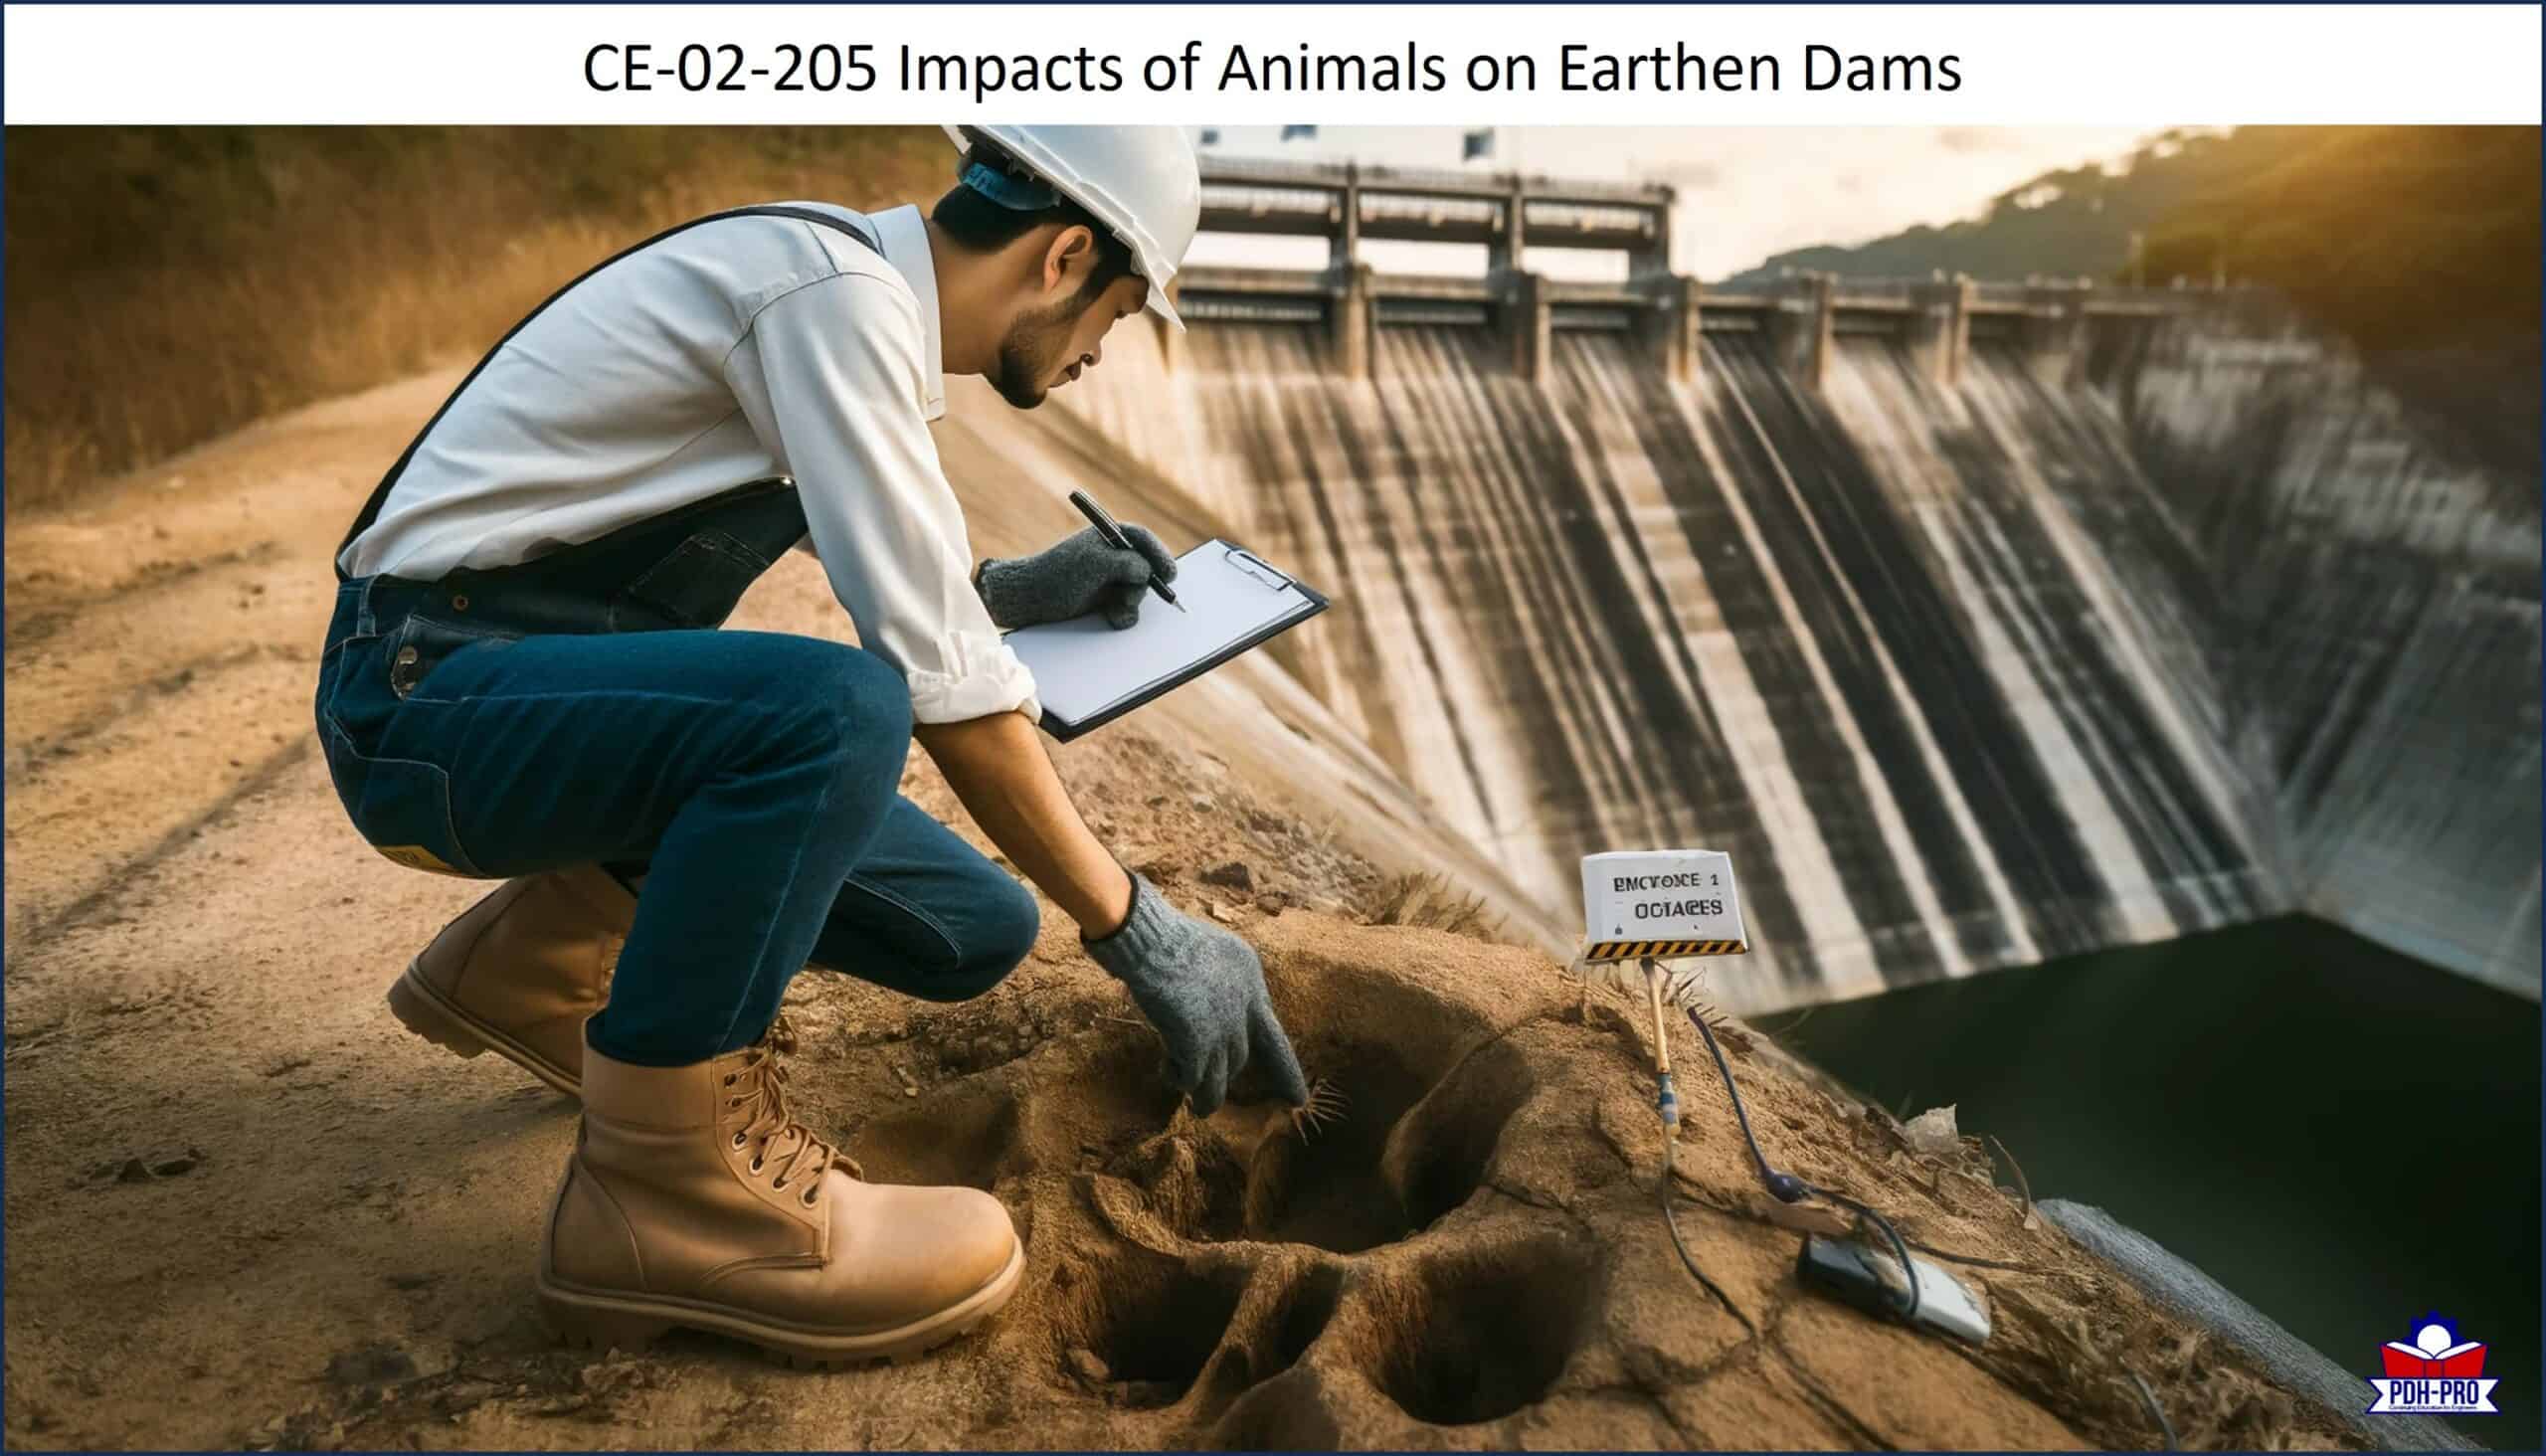 Impacts of Animals on Earthen Dams